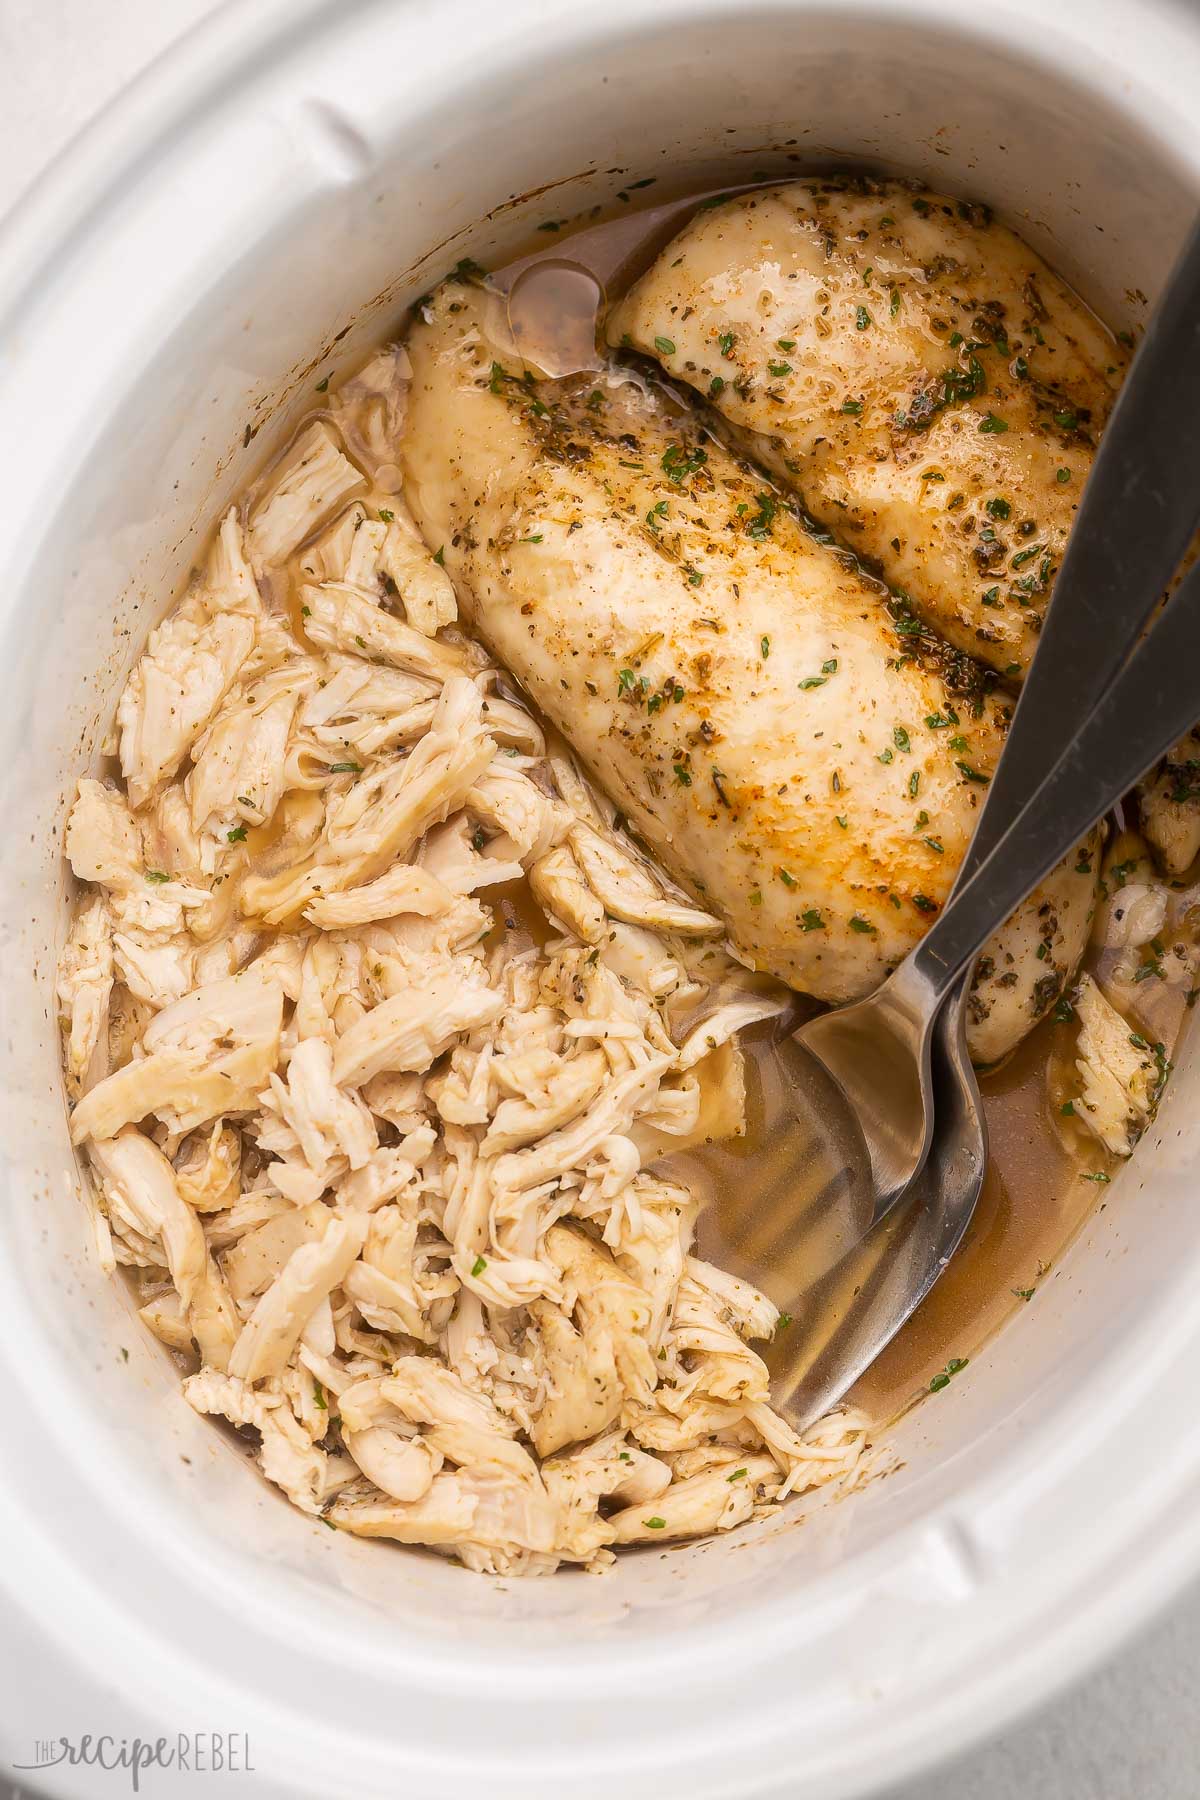 two whole chicken breasts and two shredded chicken breasts with forks in slow cooker.